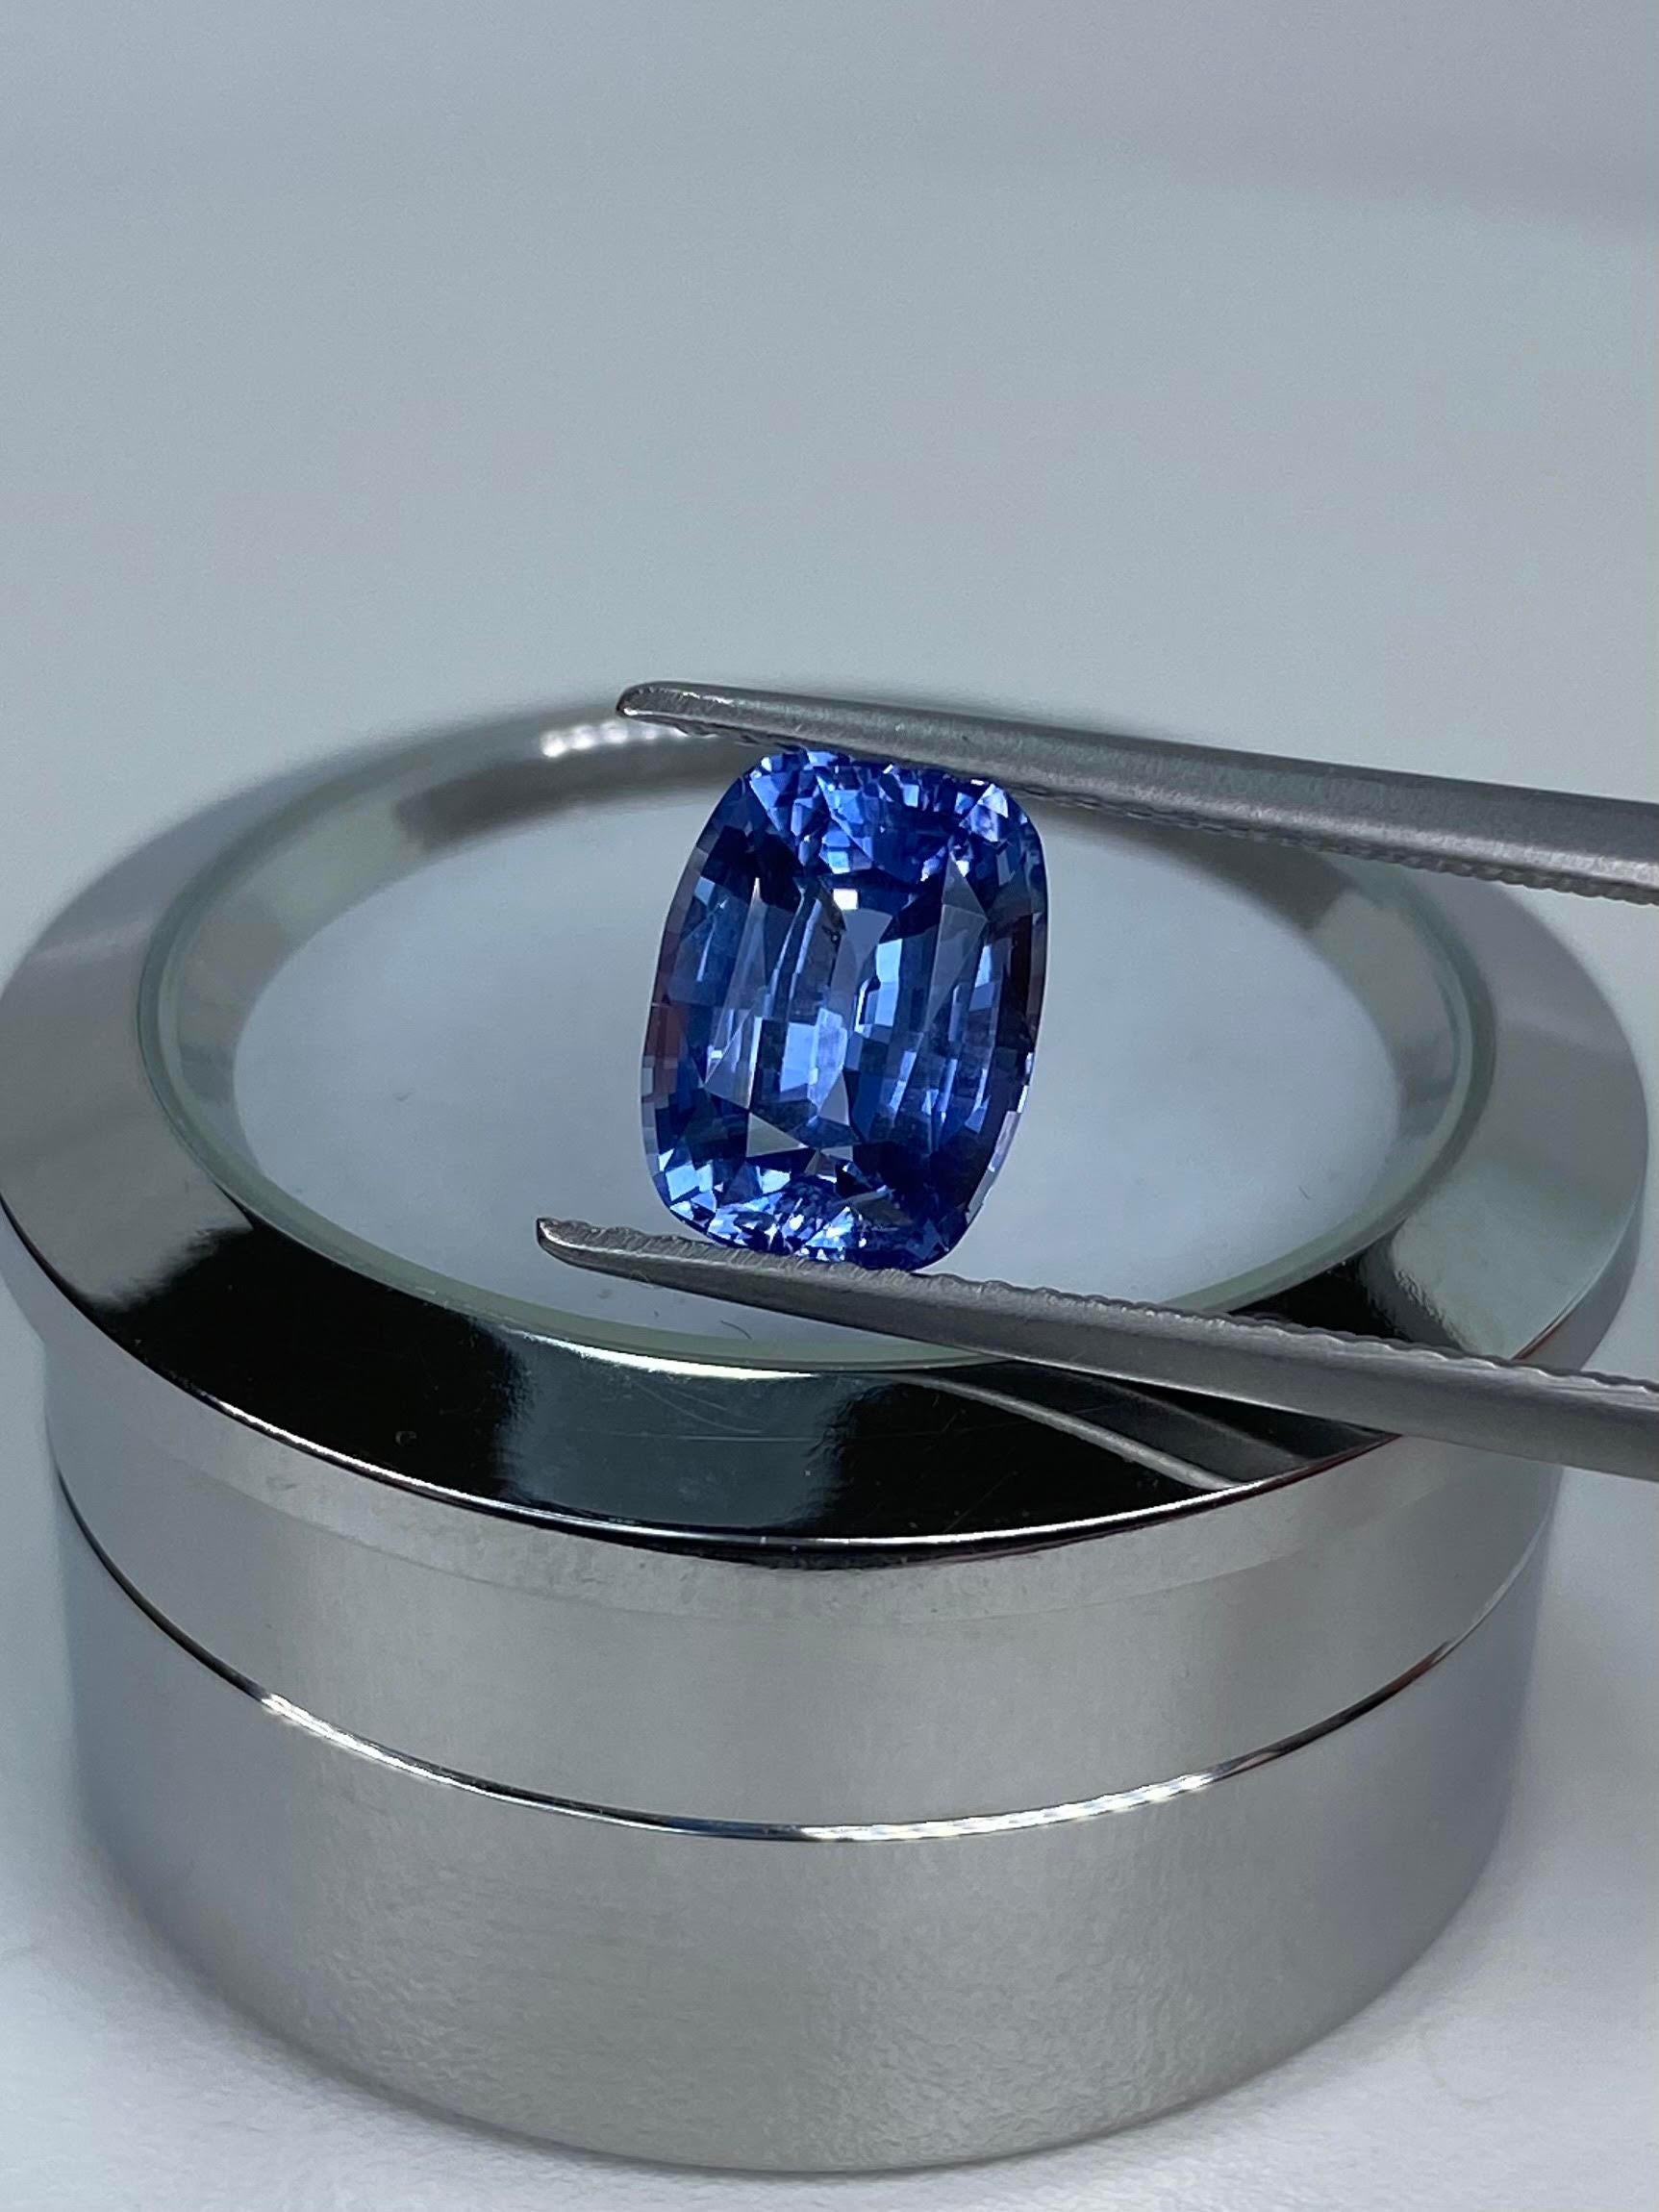 The Sapphire Merchant presents this exquisite Natural Cornflower Blue Sapphire to the market. This stunning gemstone boasts a weight of 2.53 carats. It showcases its incredible lustre in a cushion shape with a modified brilliant cut. With VVS